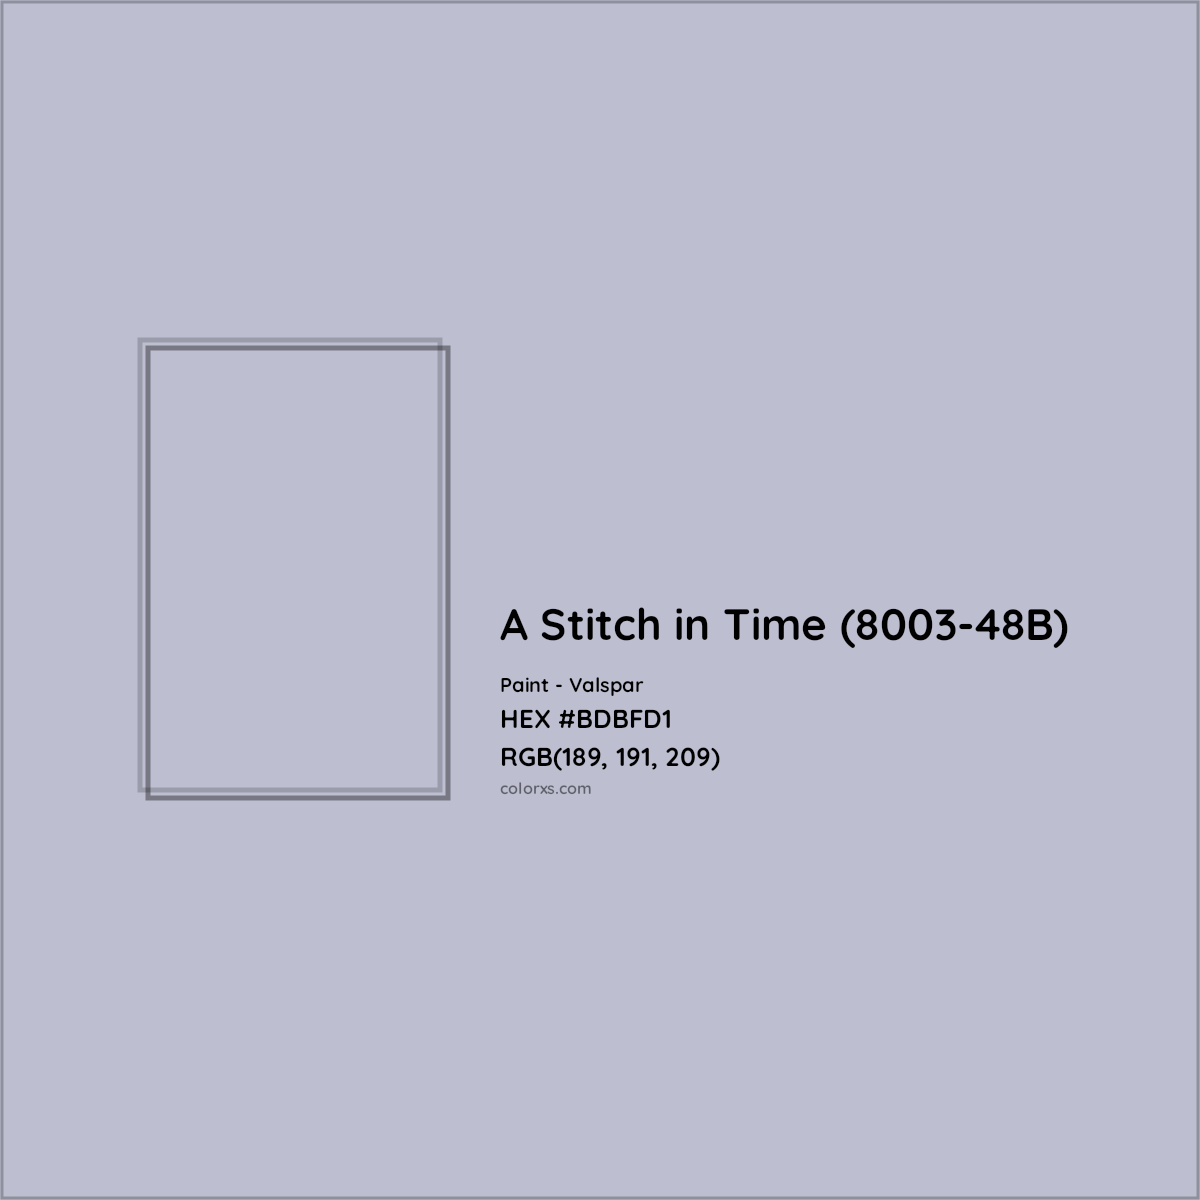 HEX #BDBFD1 A Stitch in Time (8003-48B) Paint Valspar - Color Code